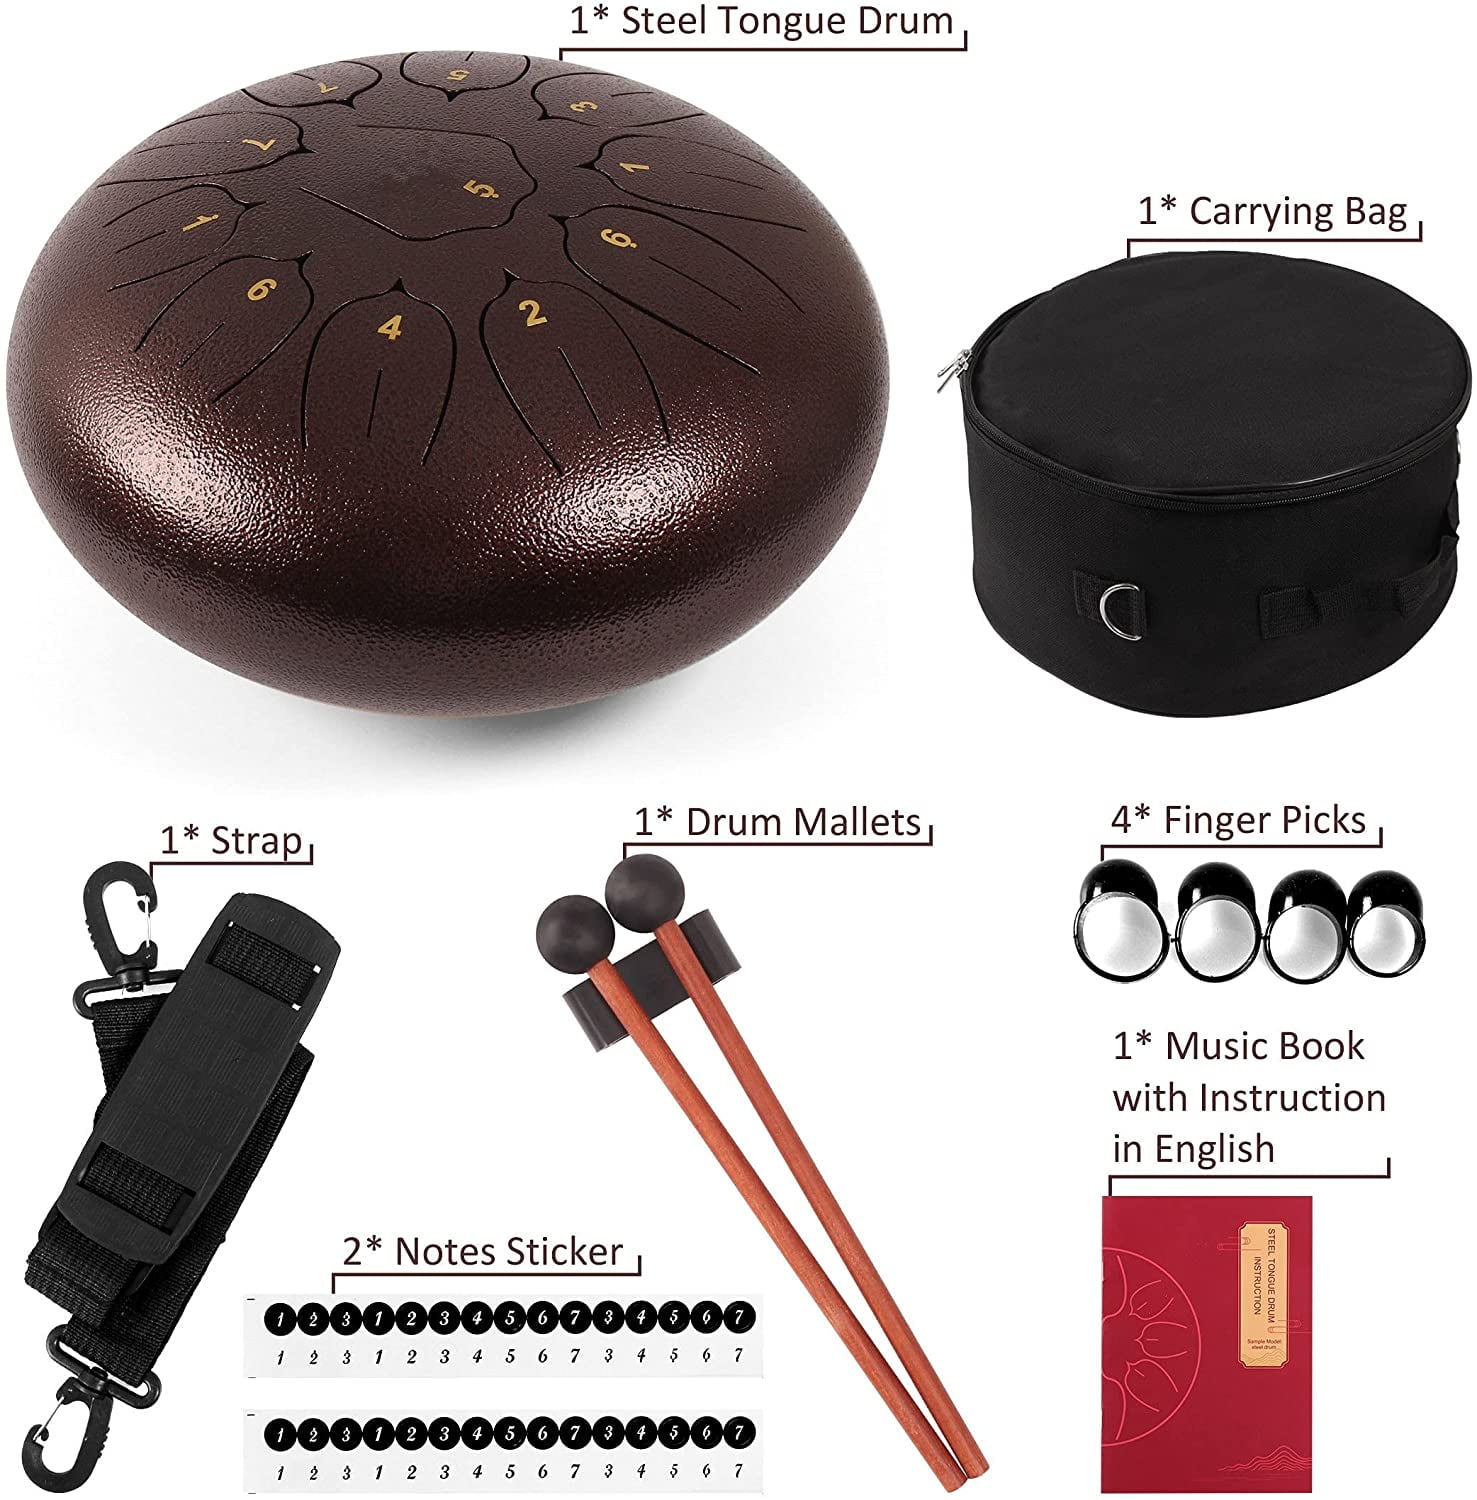 DICLLY Steel Tongue Drums,6 pouces 11 Tons Mini Tambour Handpan D